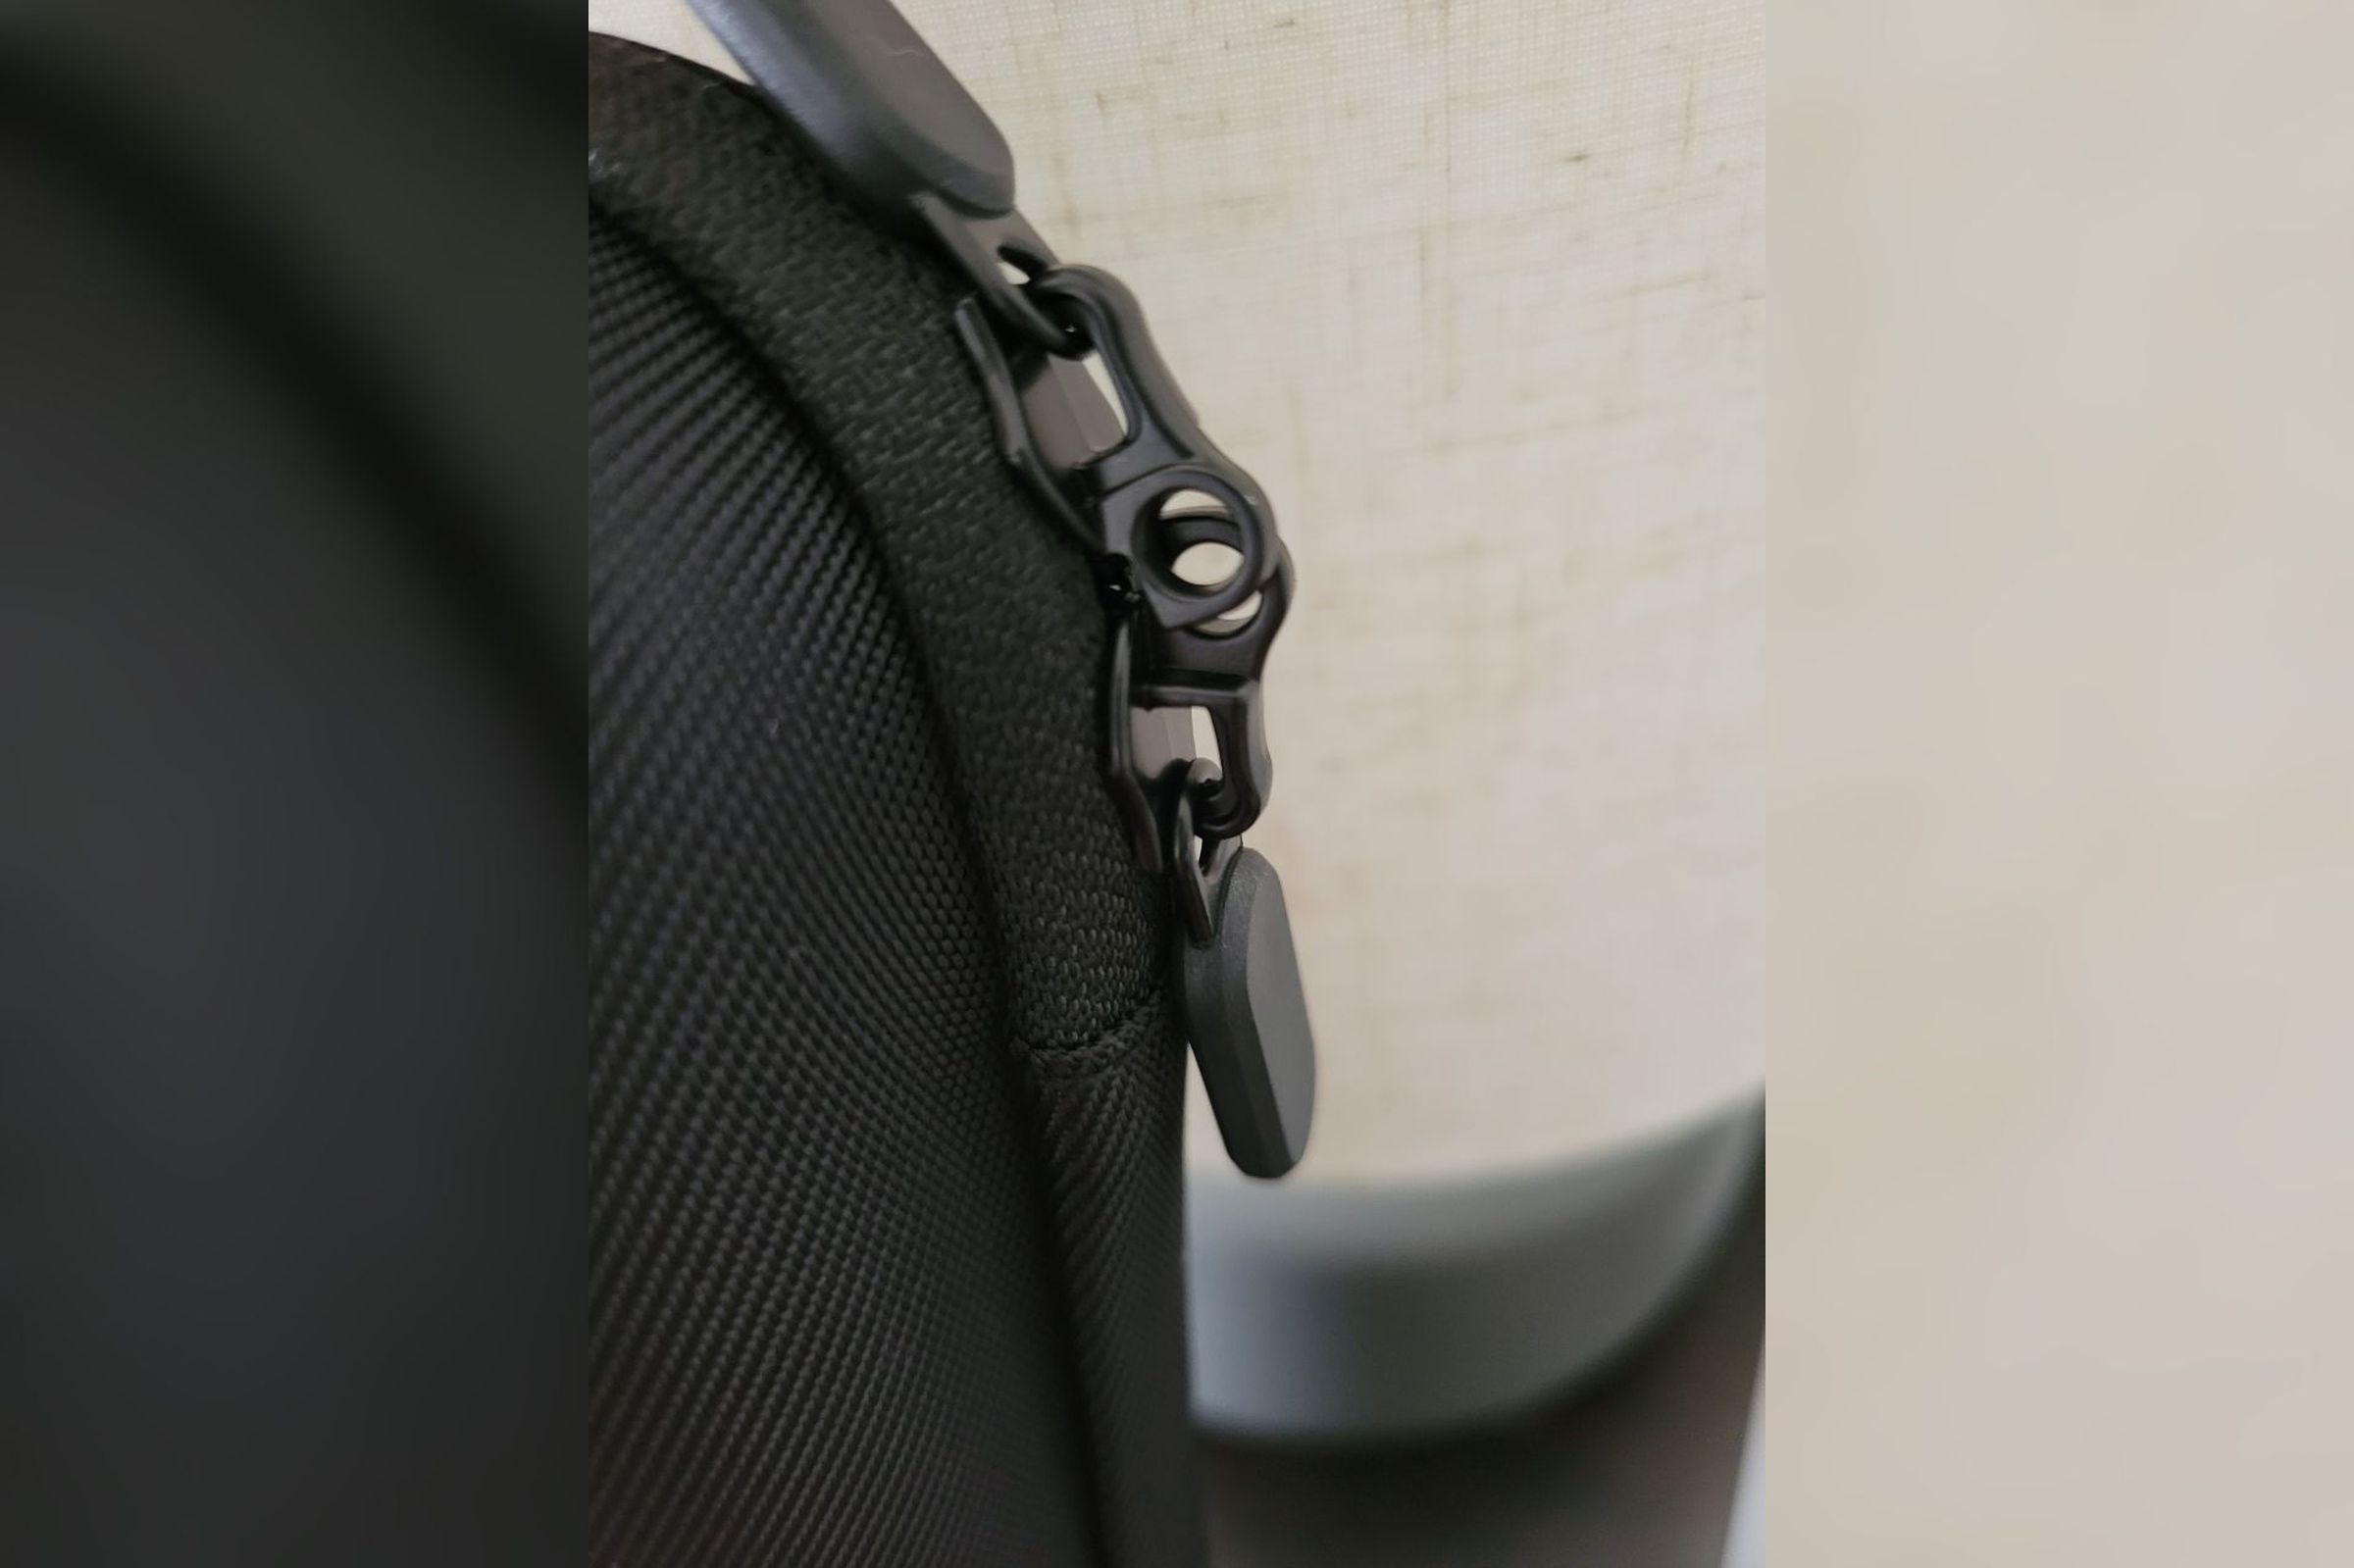 These interlocking zippers let you protect your Steam Deck with a luggage lock or, in Valve’s case, a very sturdy branded zip tie.